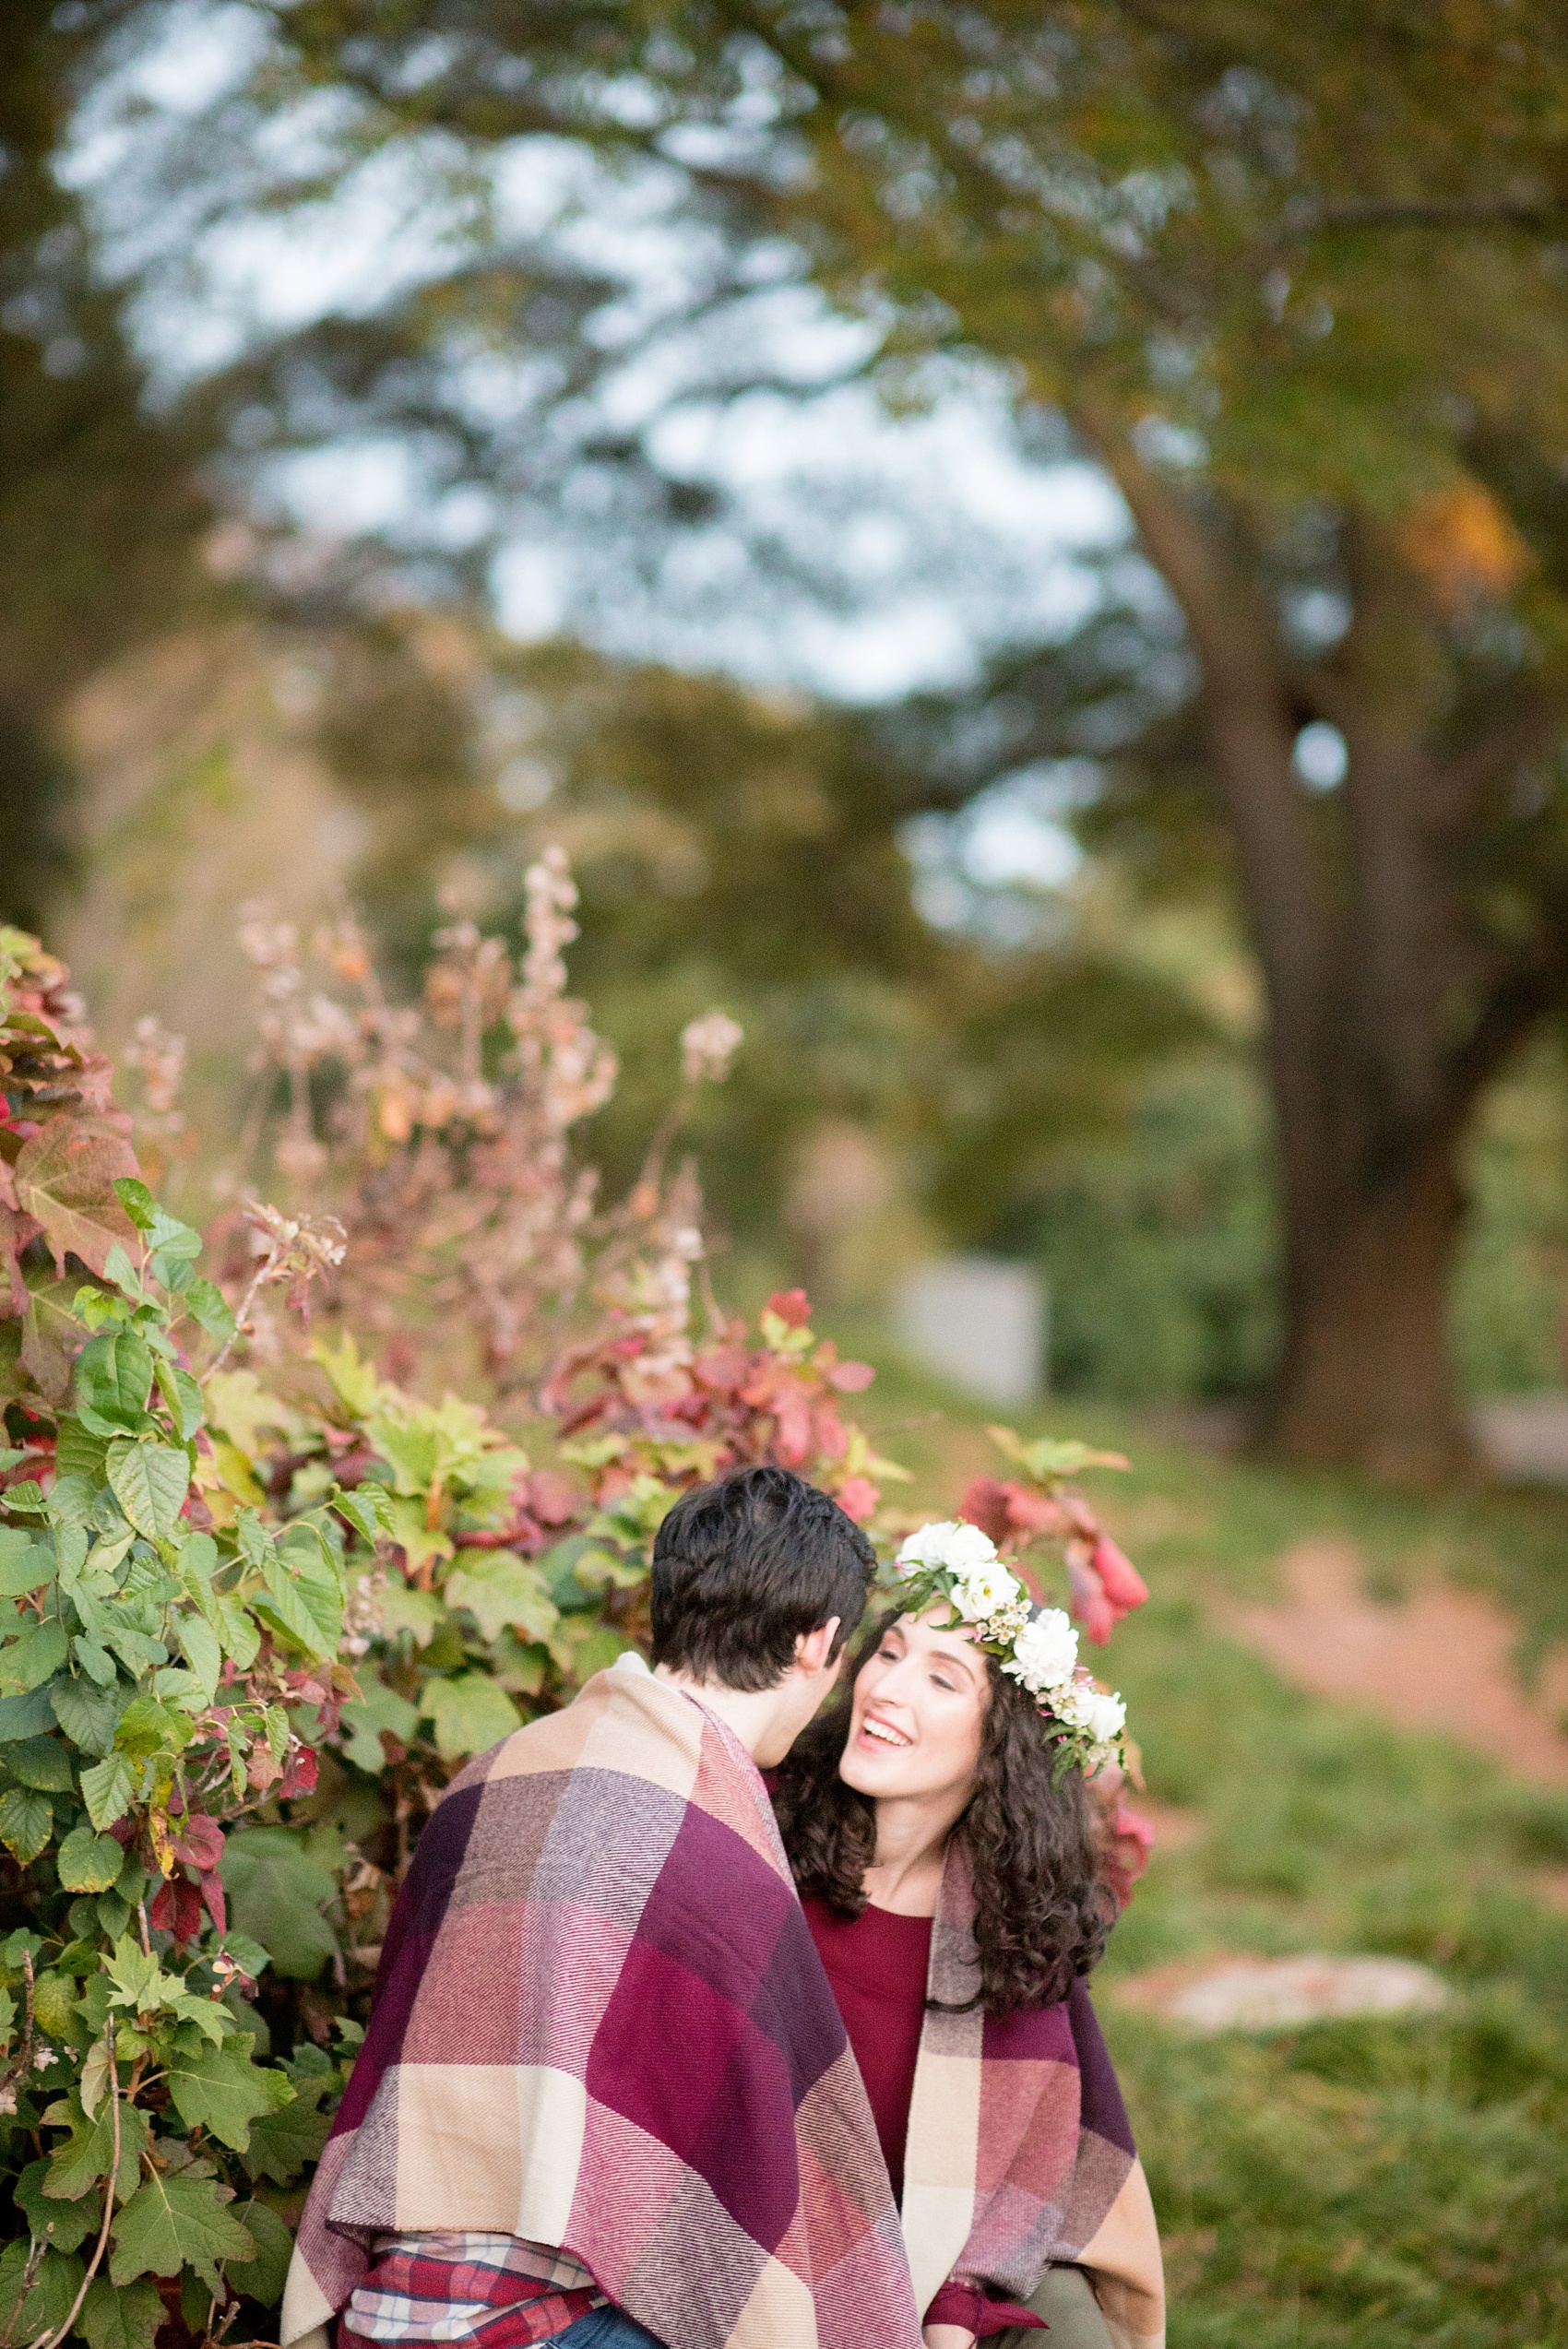 Mikkel Paige Photography photos of a Raleigh engagement session at Pullen Park. The bride and groom got cozy in a burgundy plaid blanket.